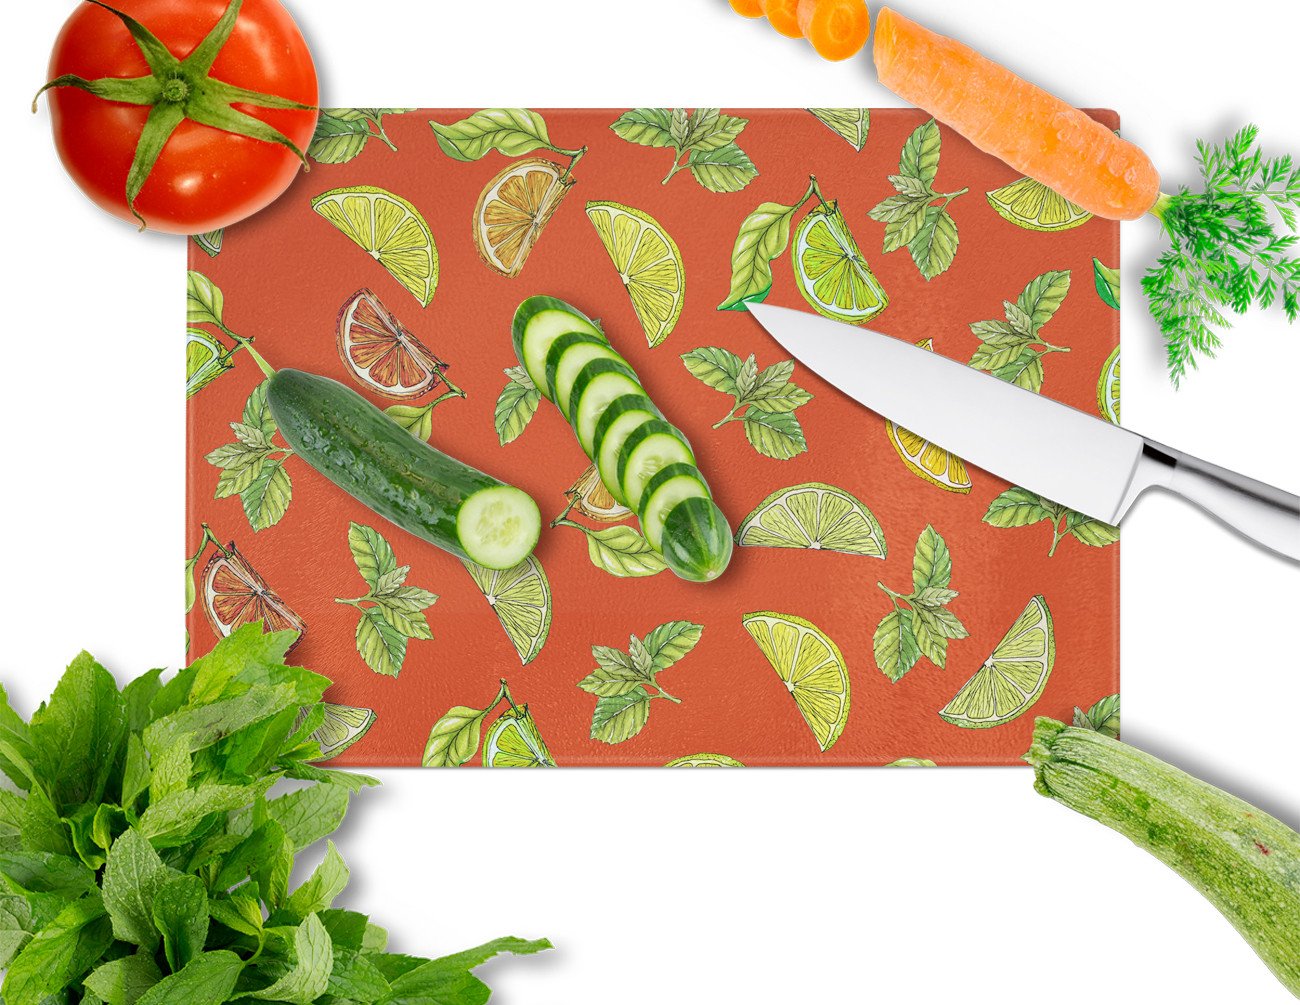 Lemons, Limes and Oranges Glass Cutting Board Large BB5205LCB by Caroline's Treasures